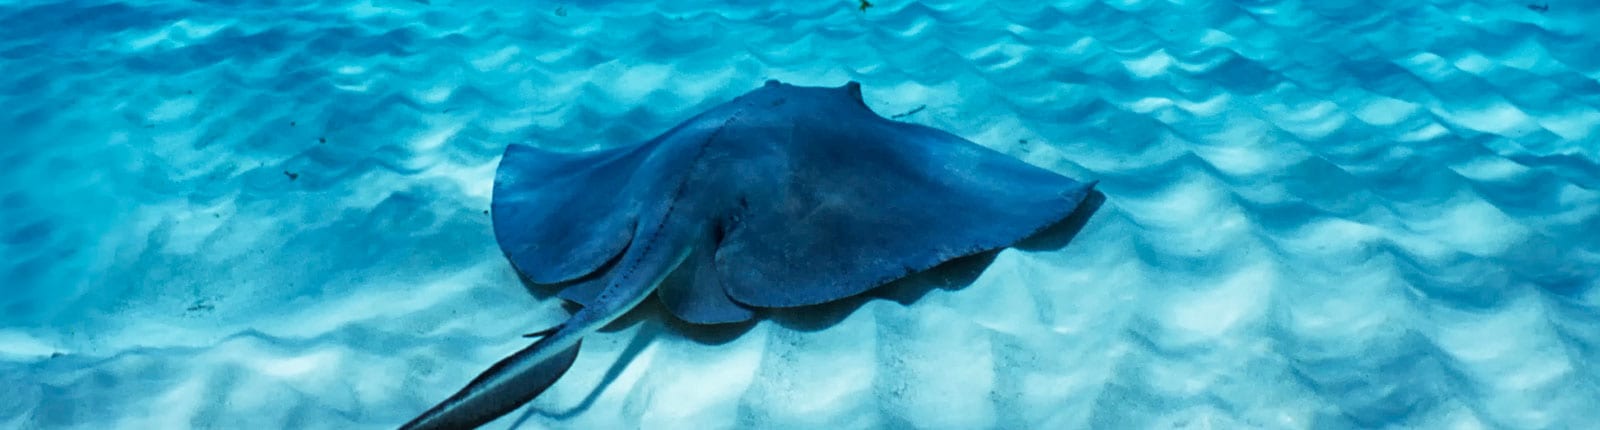 A grand stingray in the blue waters of Grand Cayman